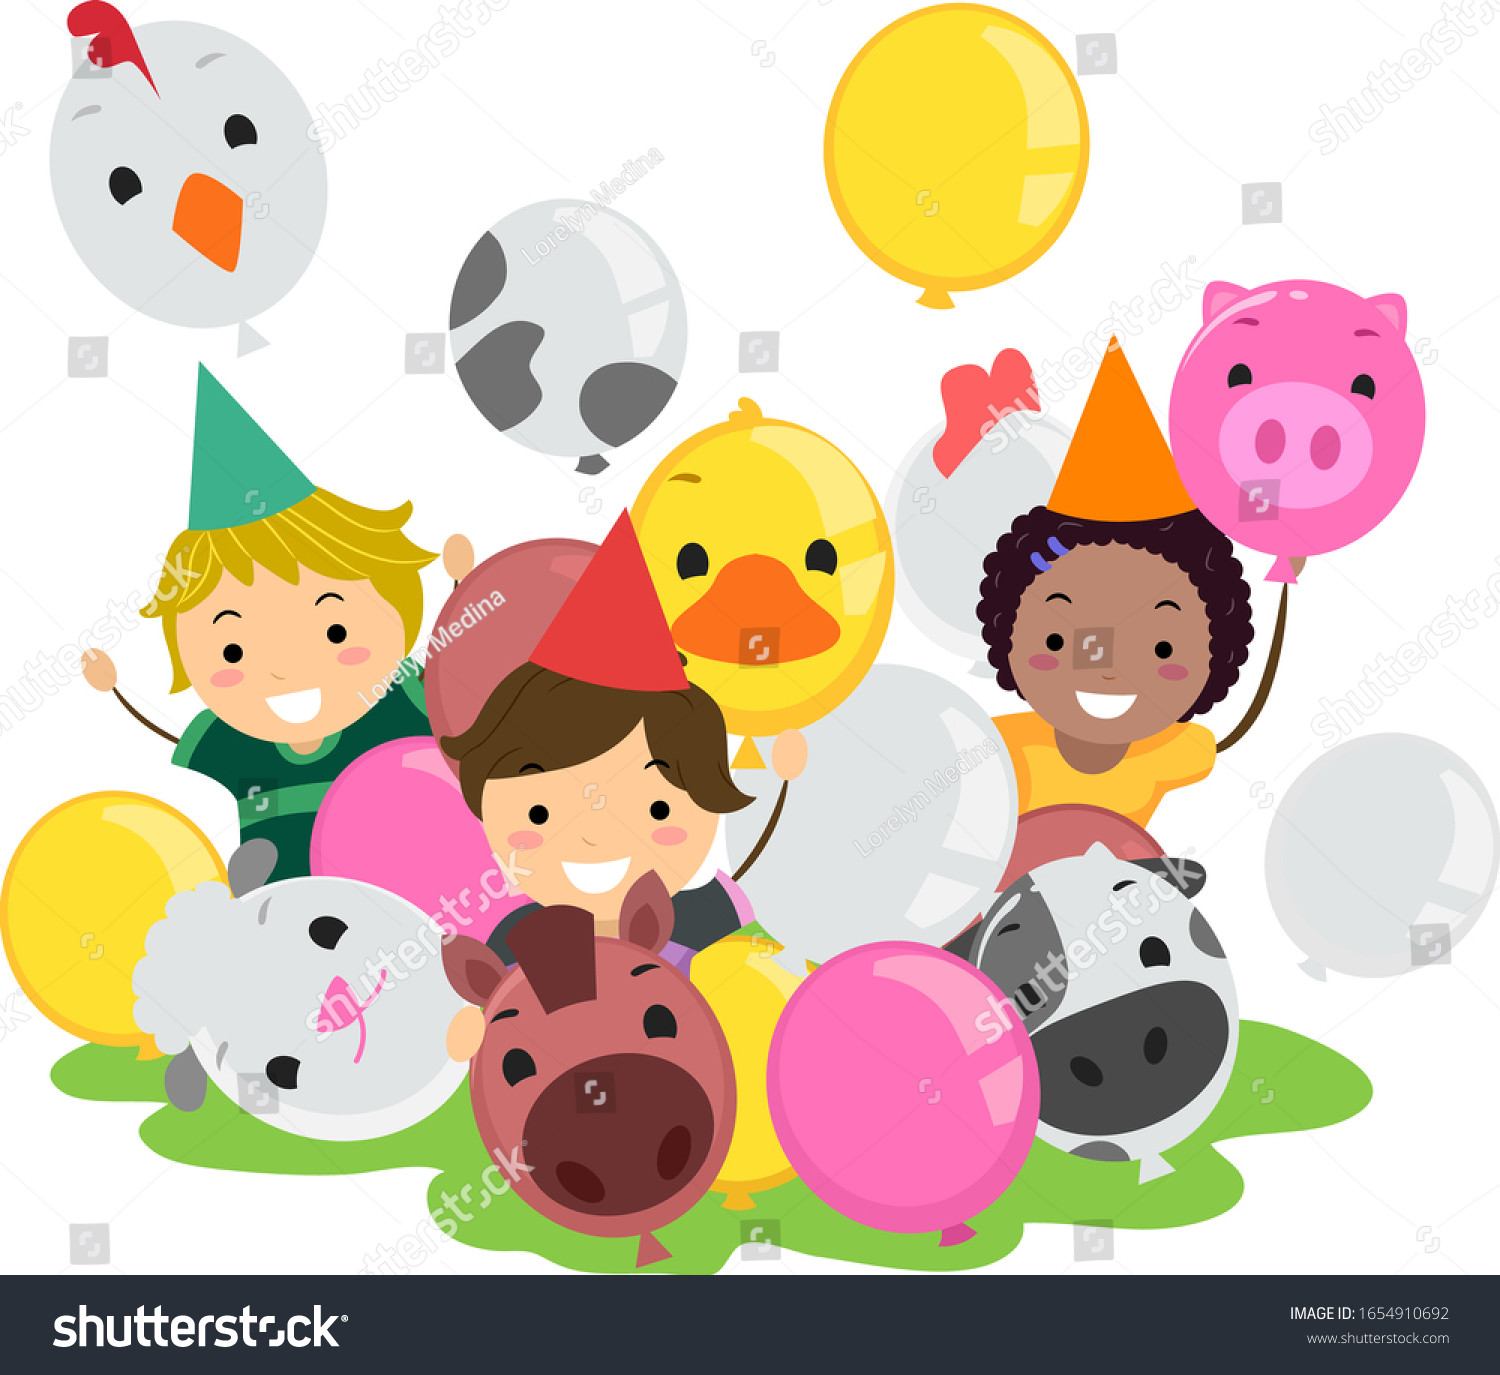 stock vector illustration of stickman kids celebrating birthday with colorful farm animal balloons and cone